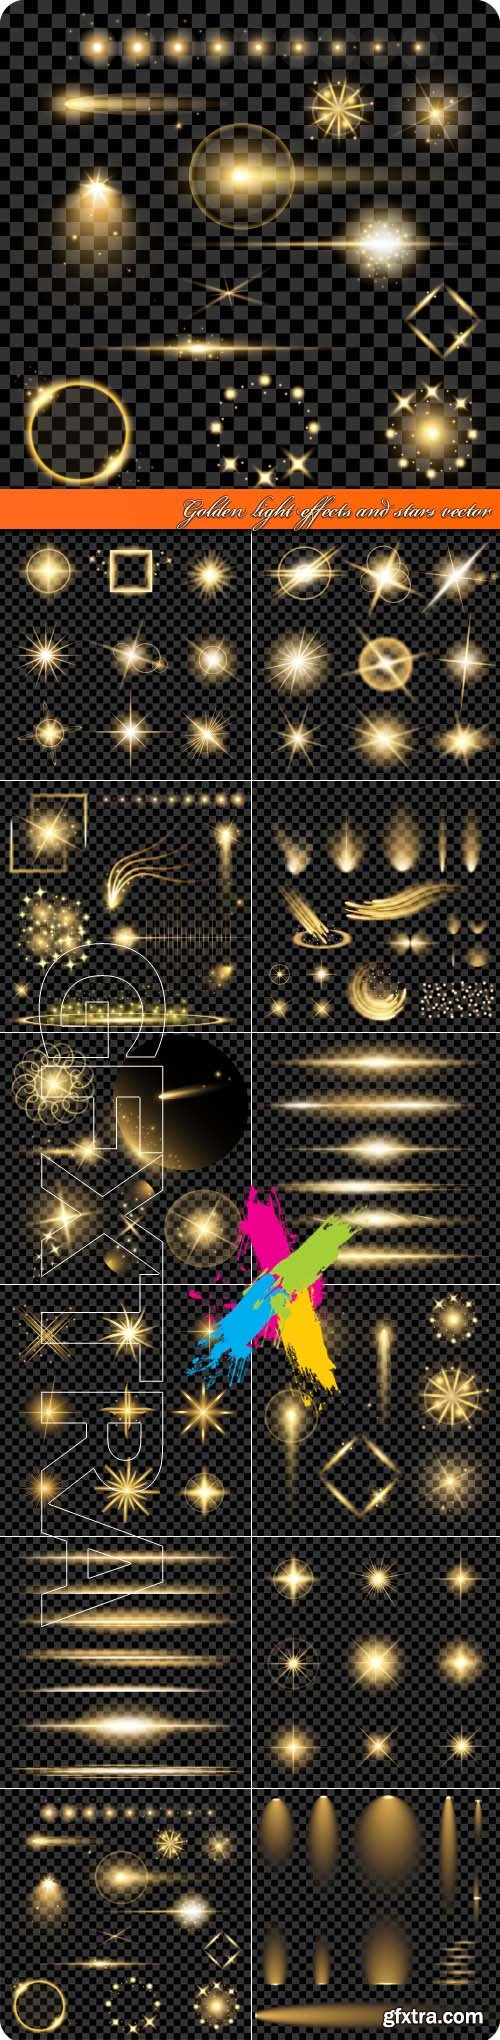 Golden light effects and stars vector